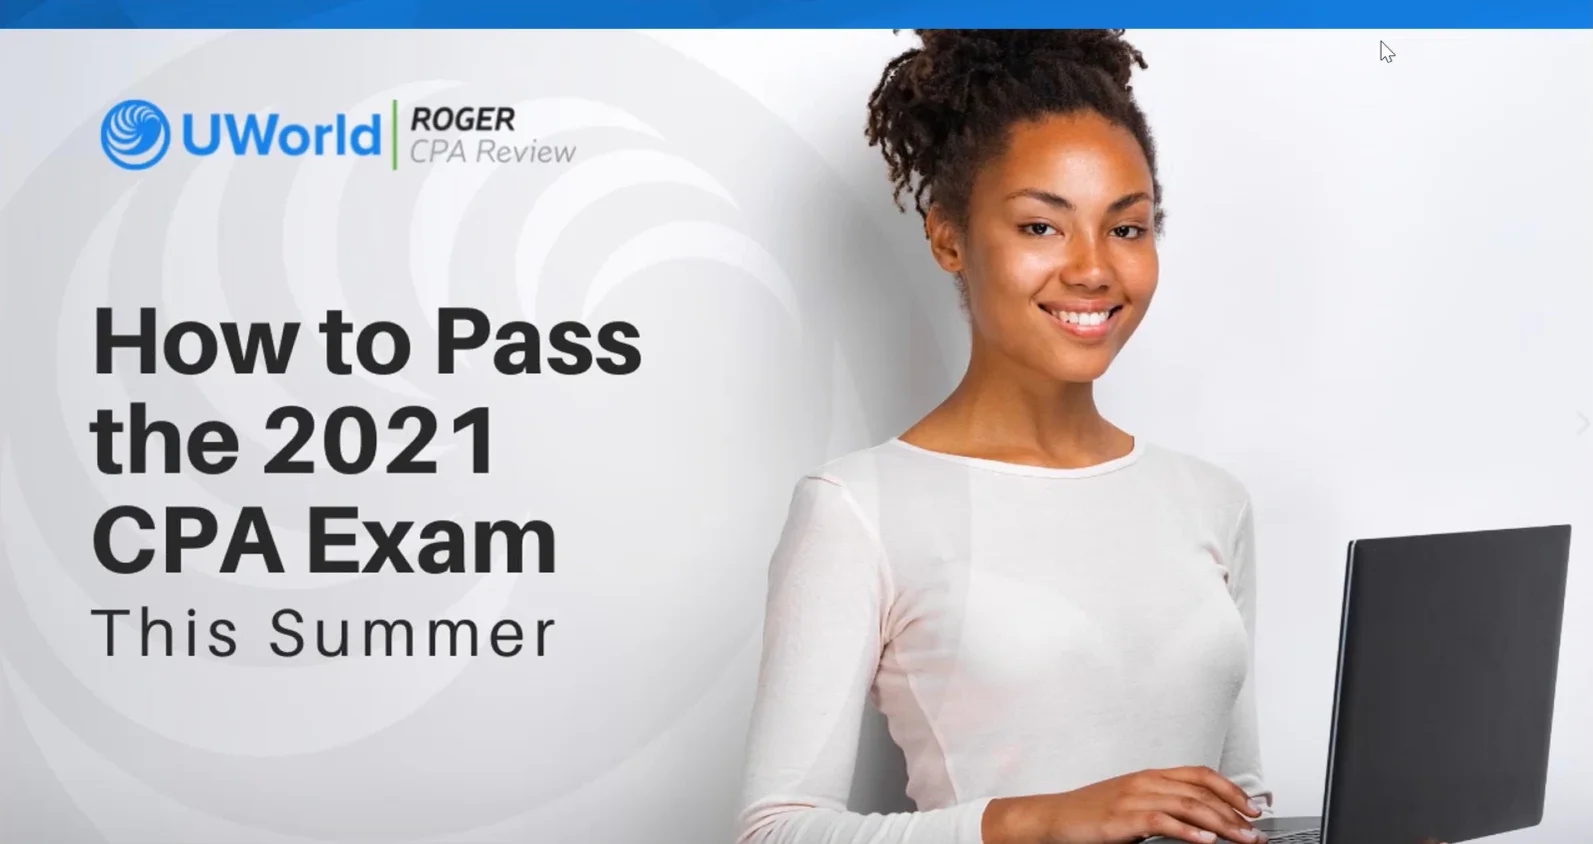 How to Pass the 2021 CPA Exam This Summer